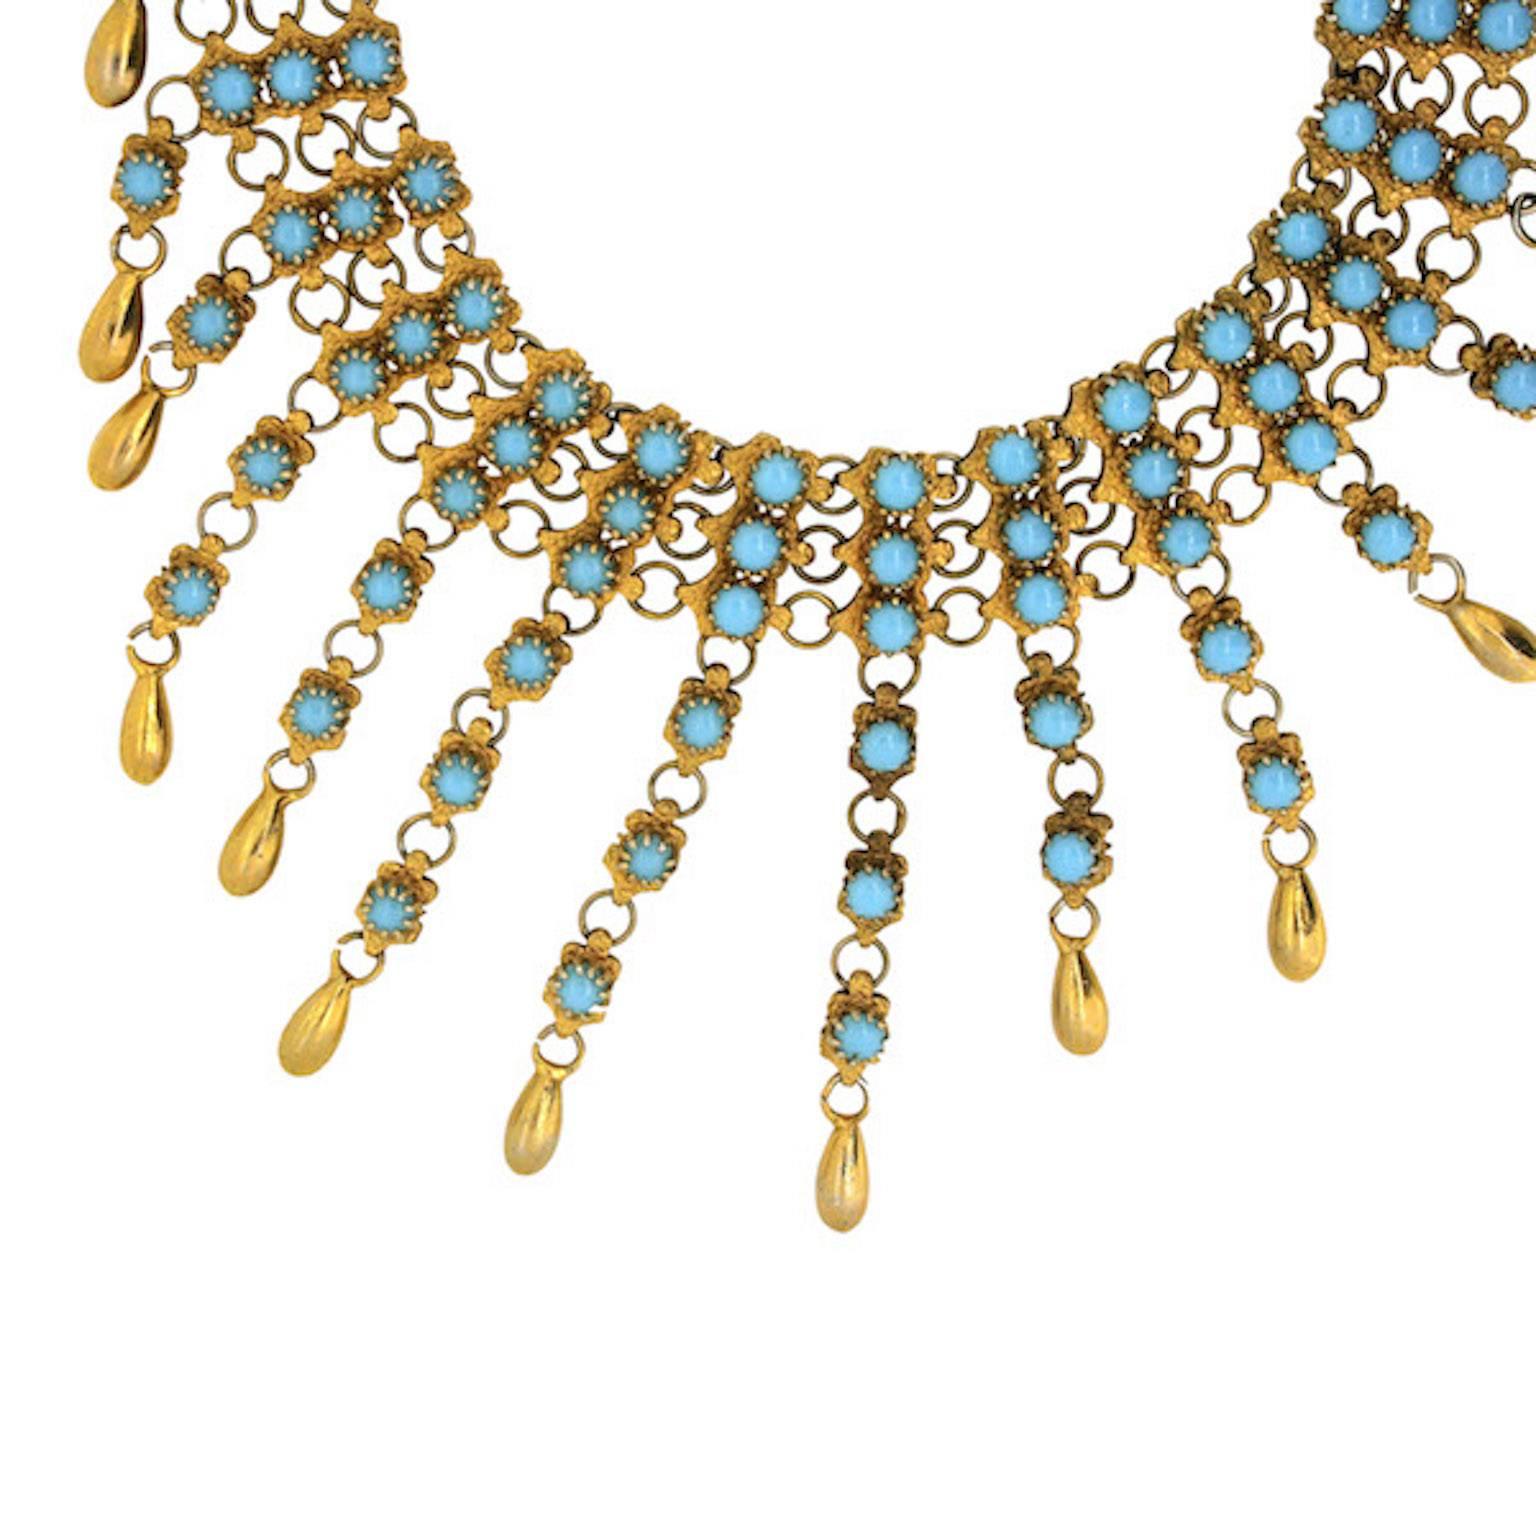 A very special piece by a much sought after maker of costume jewellery. This necklace dates from the 1950s. Its construction and design is exemplary. 
Condition Report:
Very Good - Minor wear to the surface the gold tone. This is consistent with the